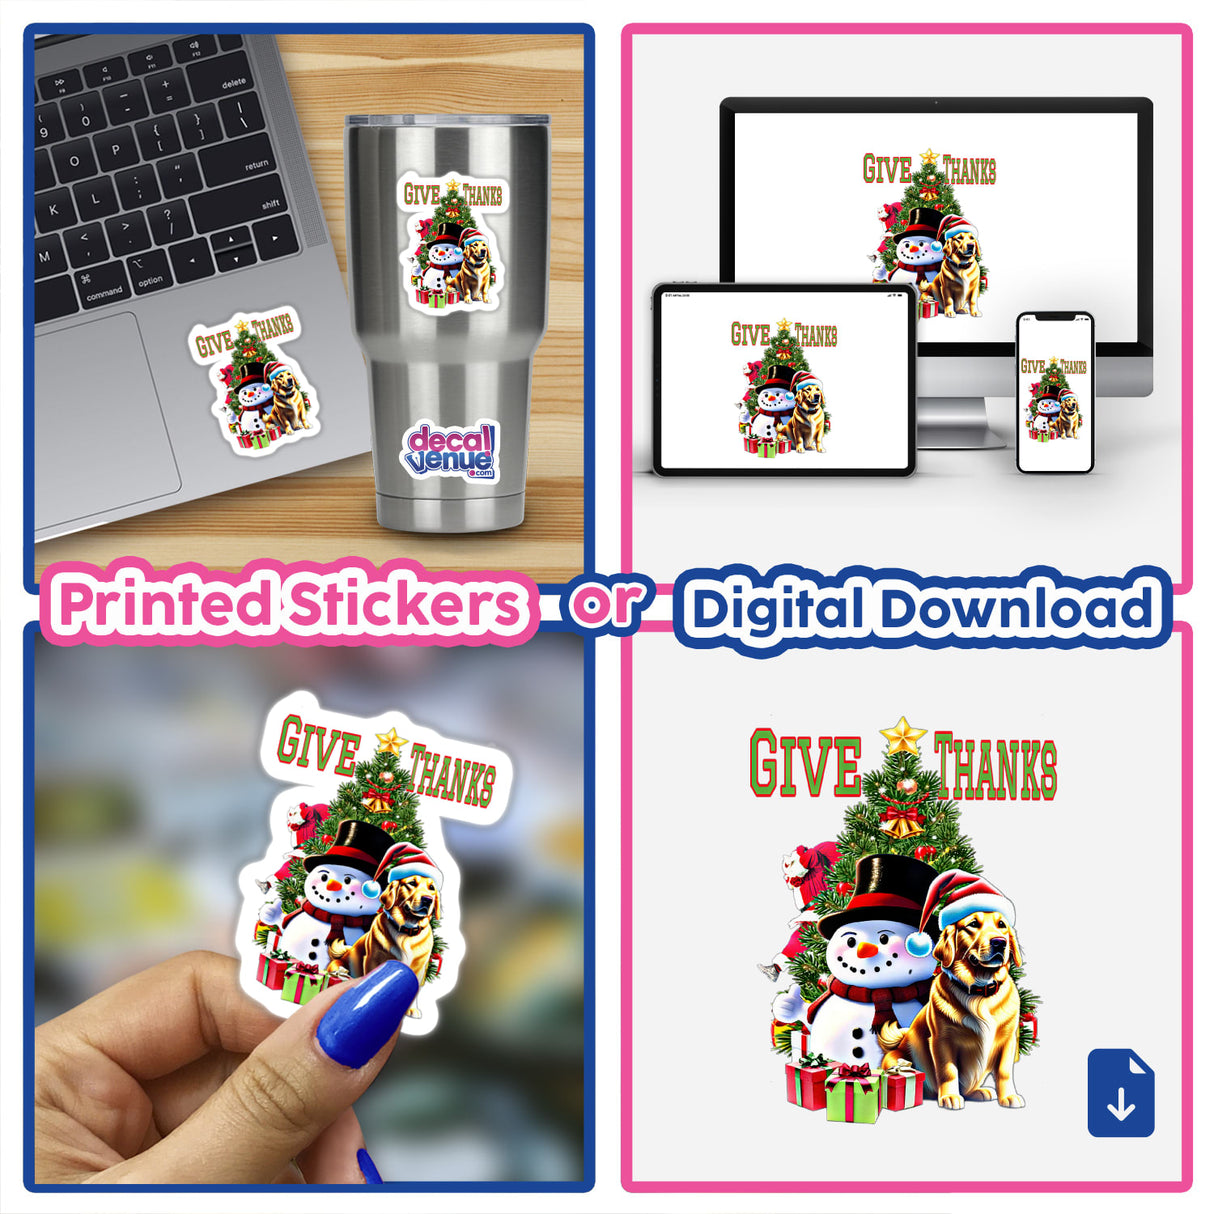 Golden Retriever Christmas stickers featuring a laptop with a festive snowman and dog cartoon, and a close-up of a finger applying a sticker.